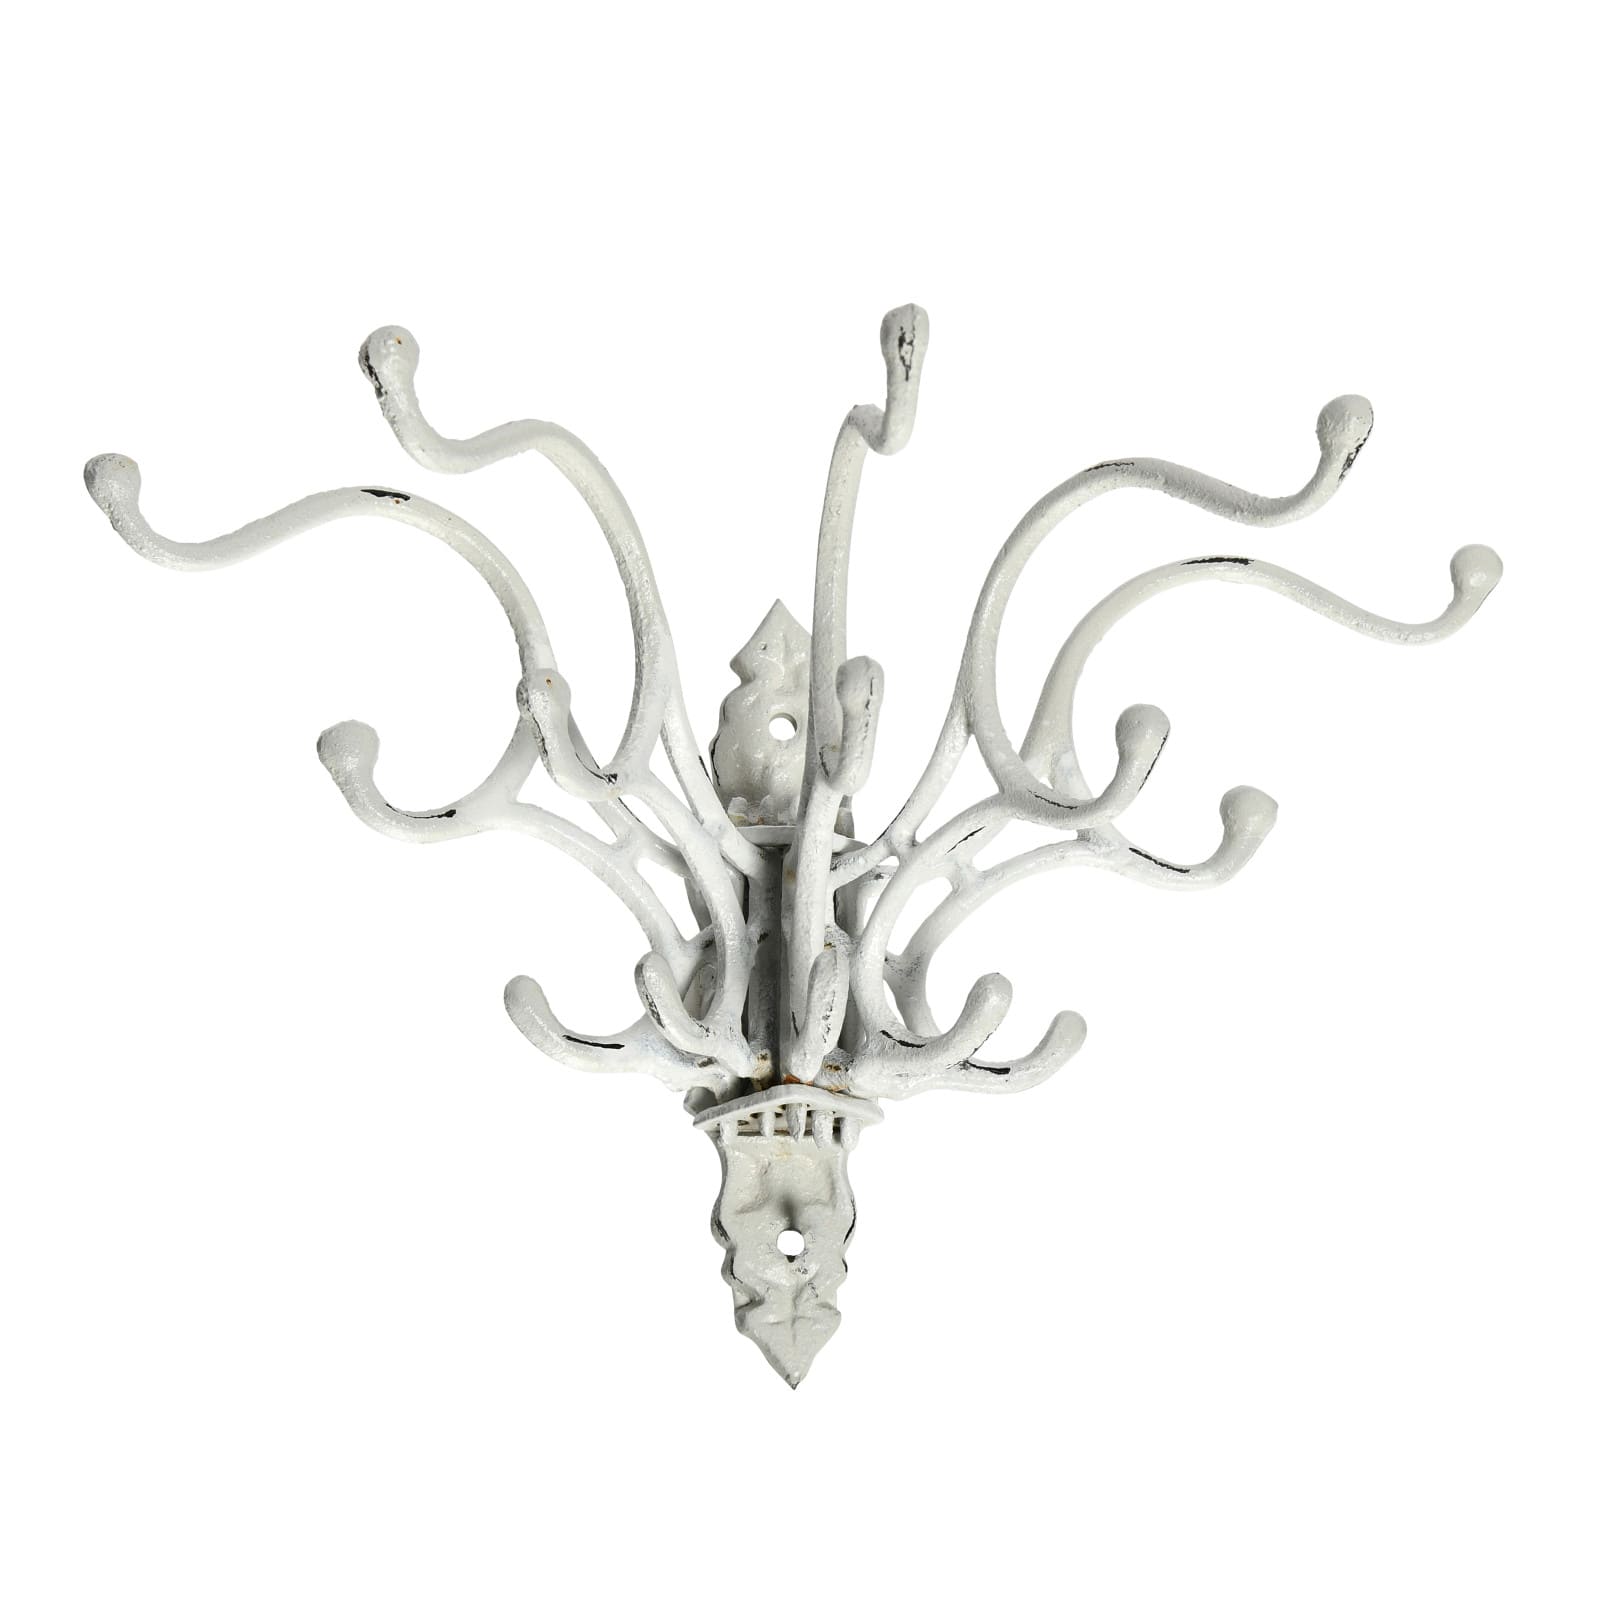 White Decorative Distressed Metal Wall Hook